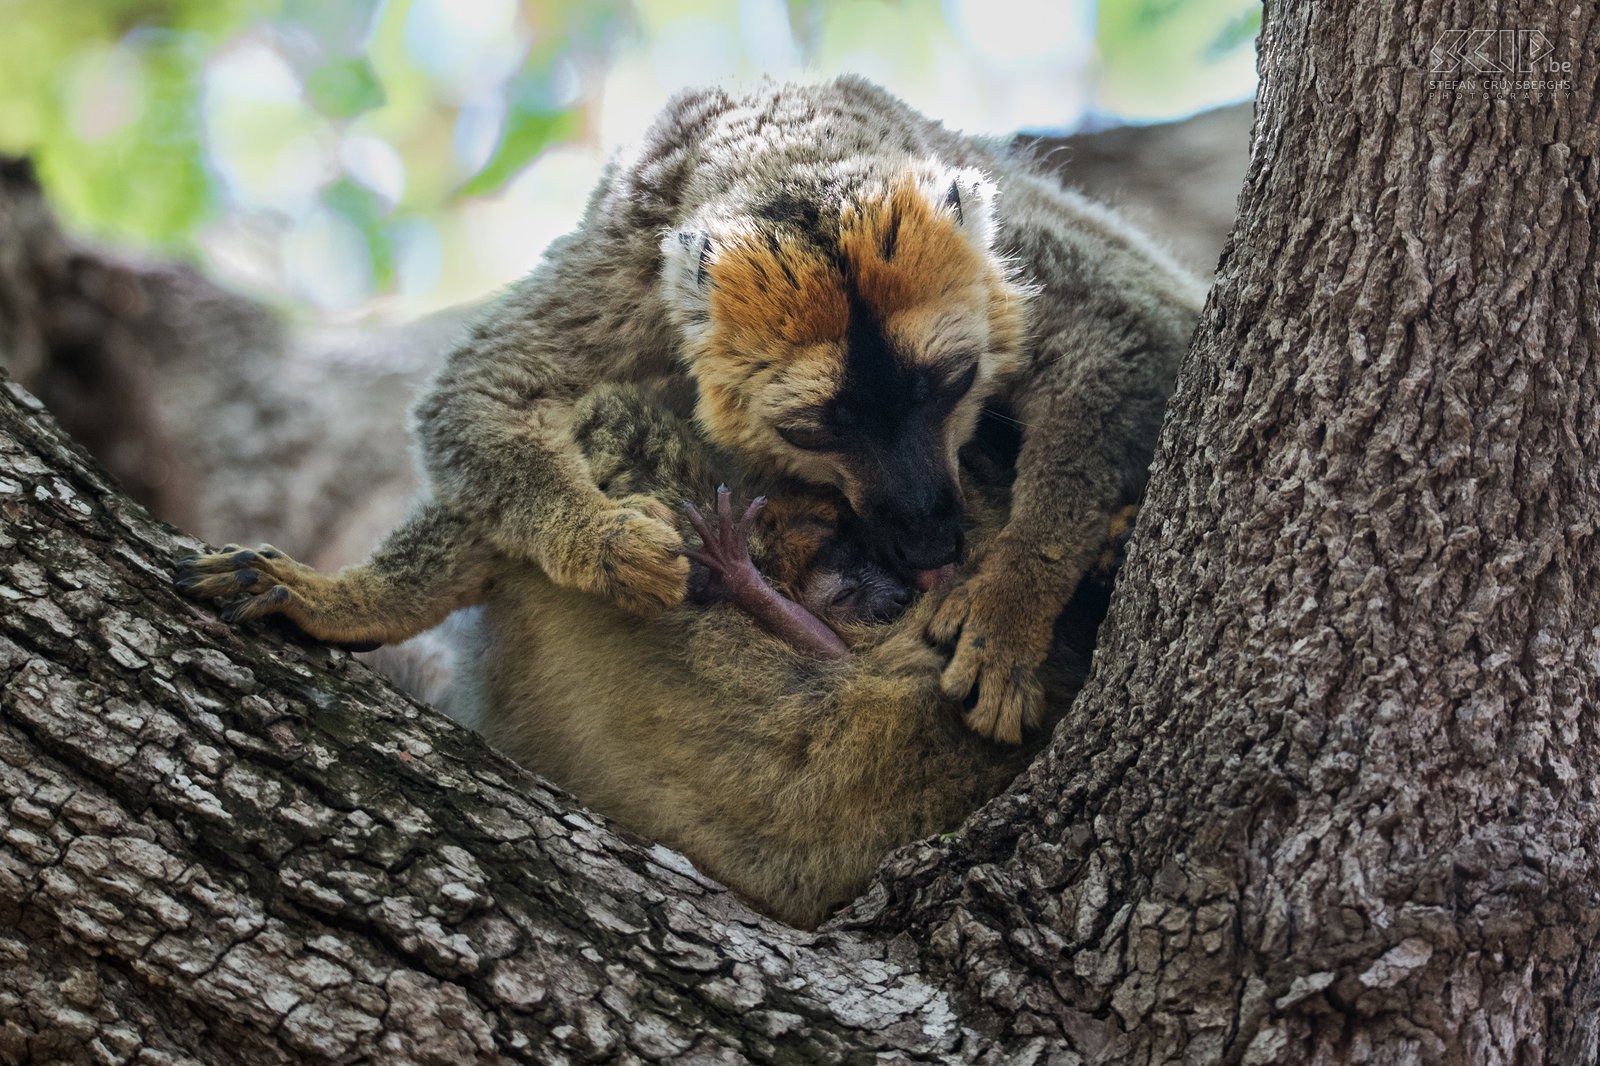 Kirindy - Red-fronted brown lemur family A father lemur cleaning his baby. This was a wonderful moment to witness. Stefan Cruysberghs